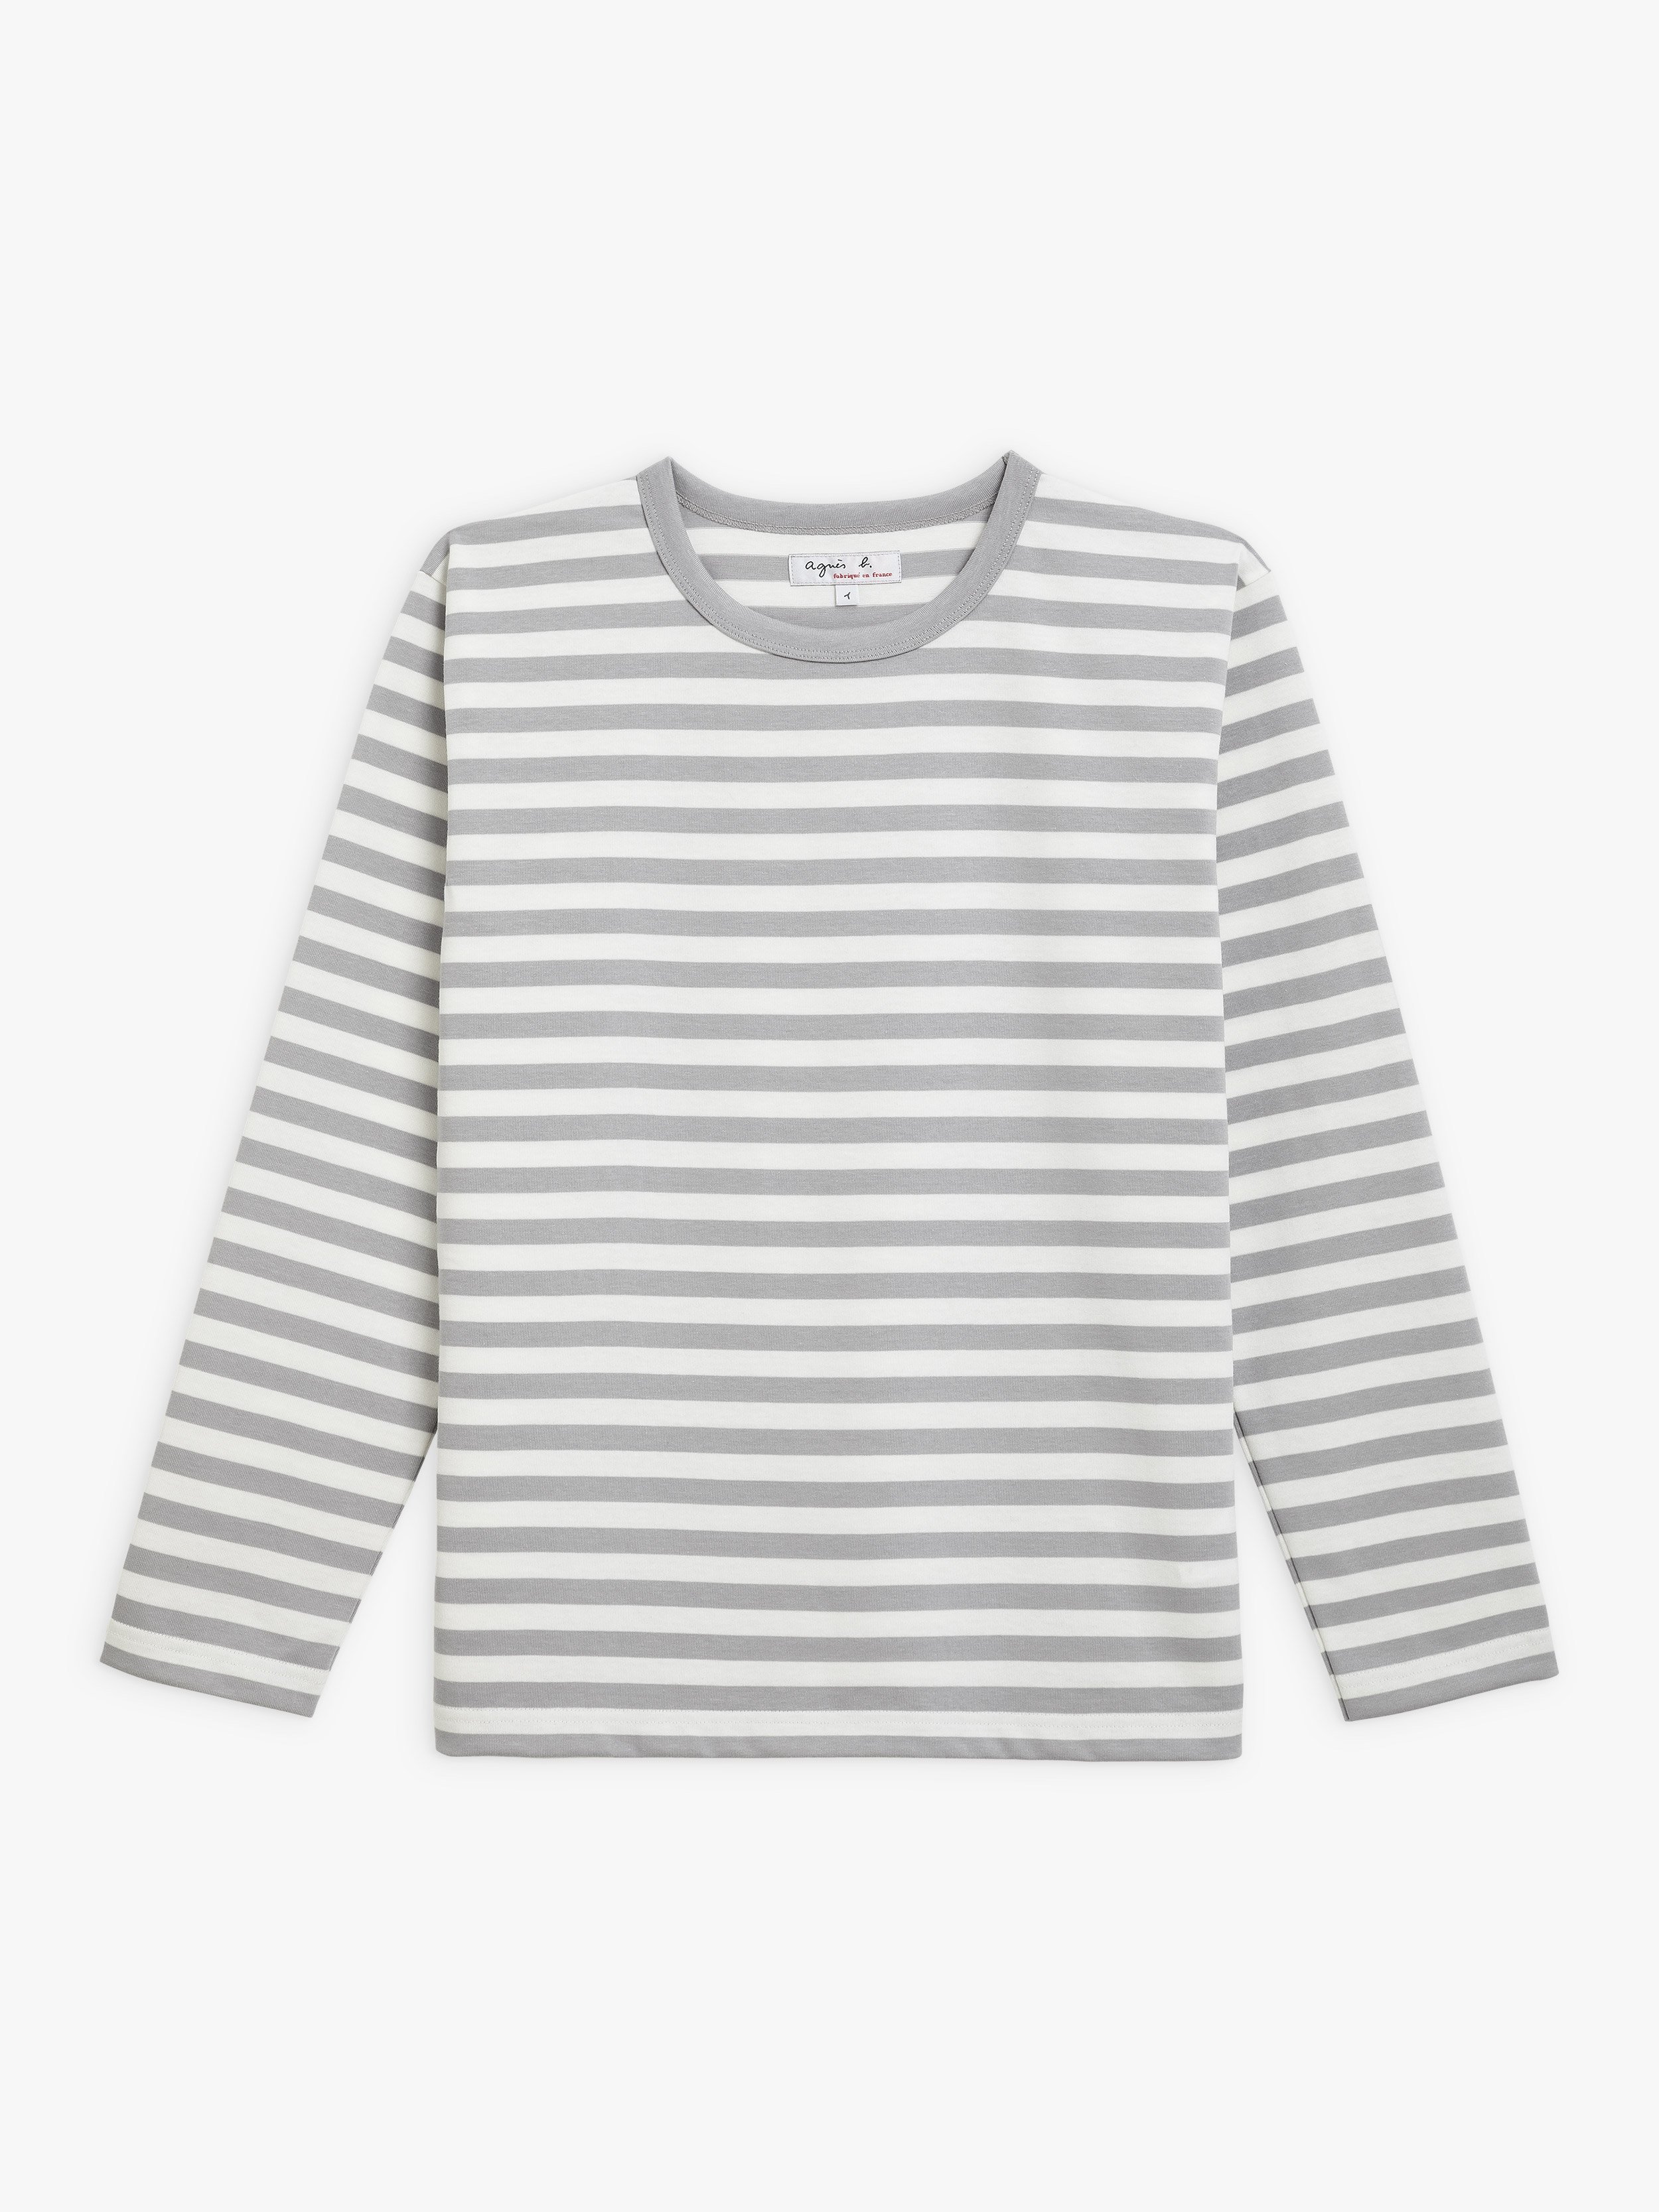 grey and white striped cool t-shirt